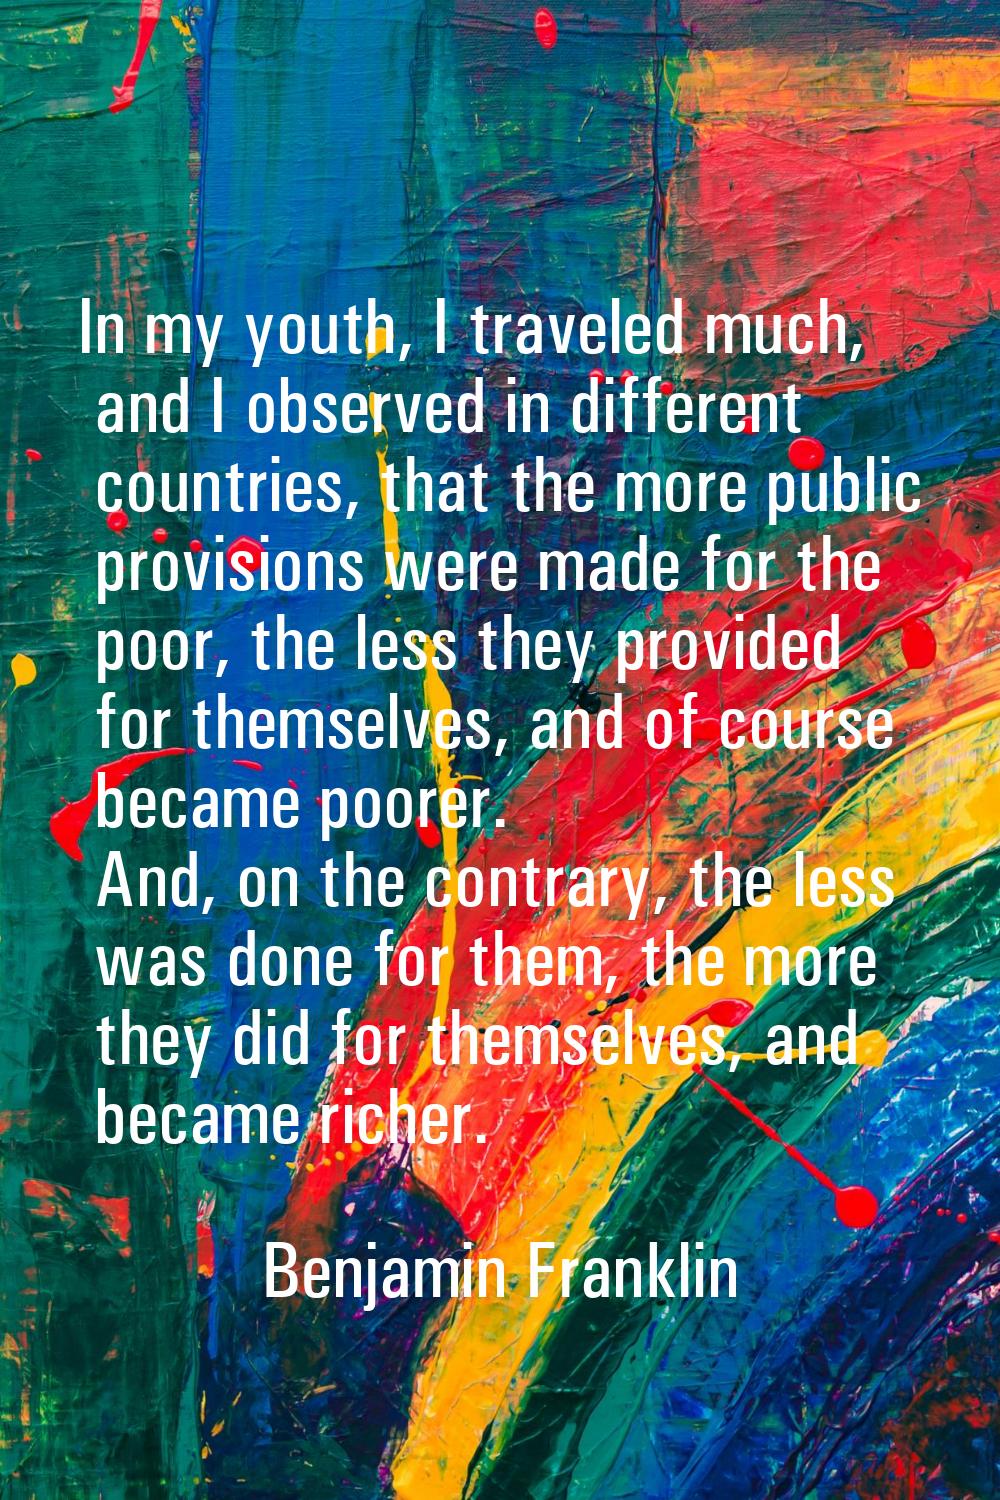 In my youth, I traveled much, and I observed in different countries, that the more public provision